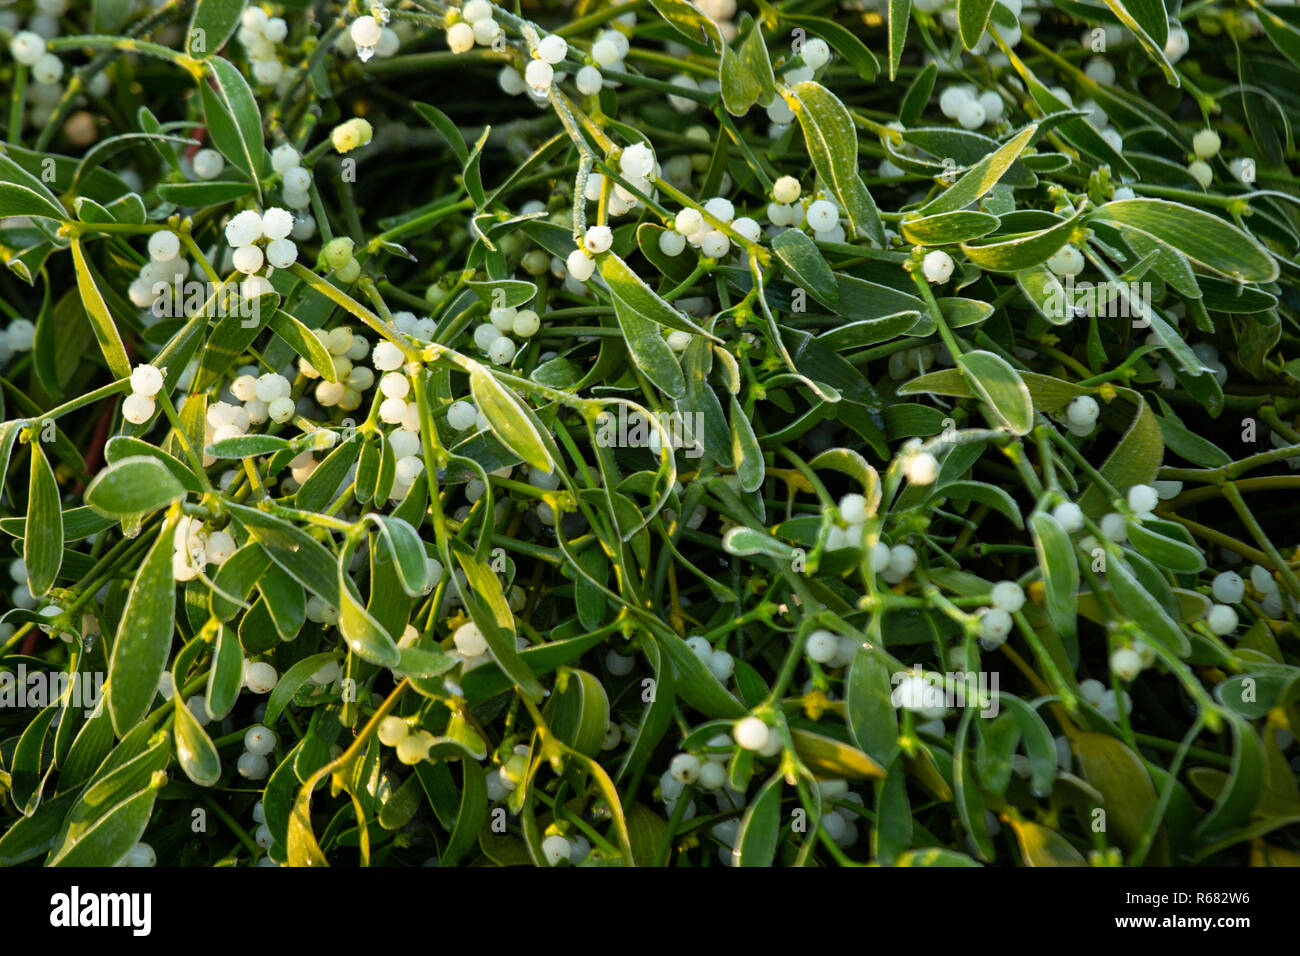 Tenbury Wells, England, UK. 4th, December,2018. Some of the mistletoe on sale. The annual mistletoe and holly auctions have been taking place for over 160 years in Tenbury Wells. The auctions are held at Burford Hall Gardens and attract buyers from all over the UK. Credit: David Warren/Alamy Live News Stock Photo